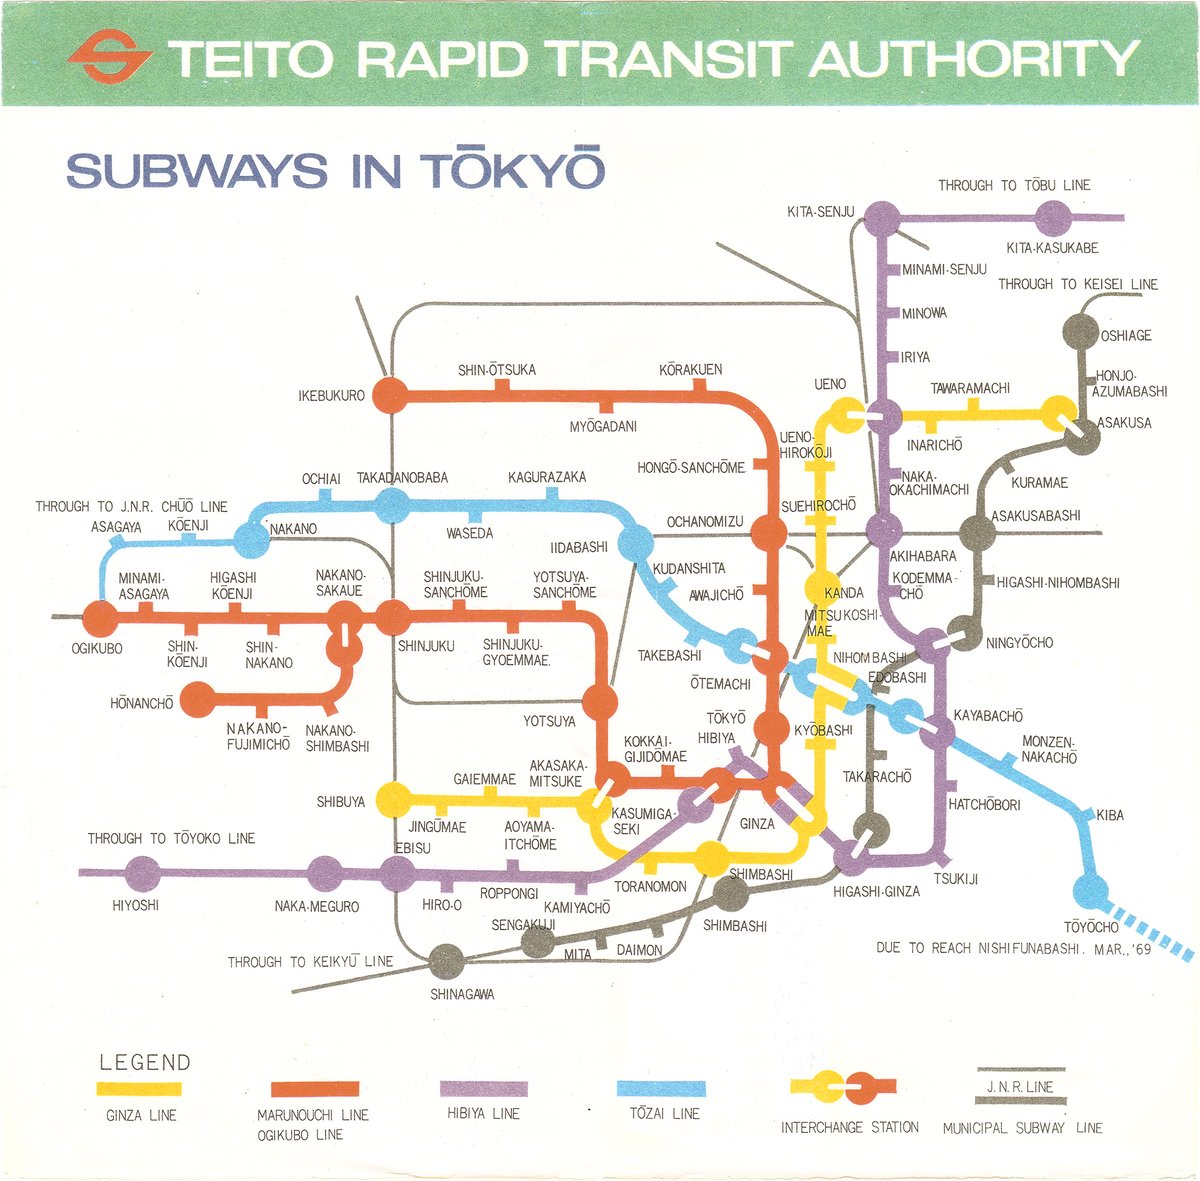 Here we see more tick-mark station symbols in the official Tokyo Metro map. This is circa 1968.